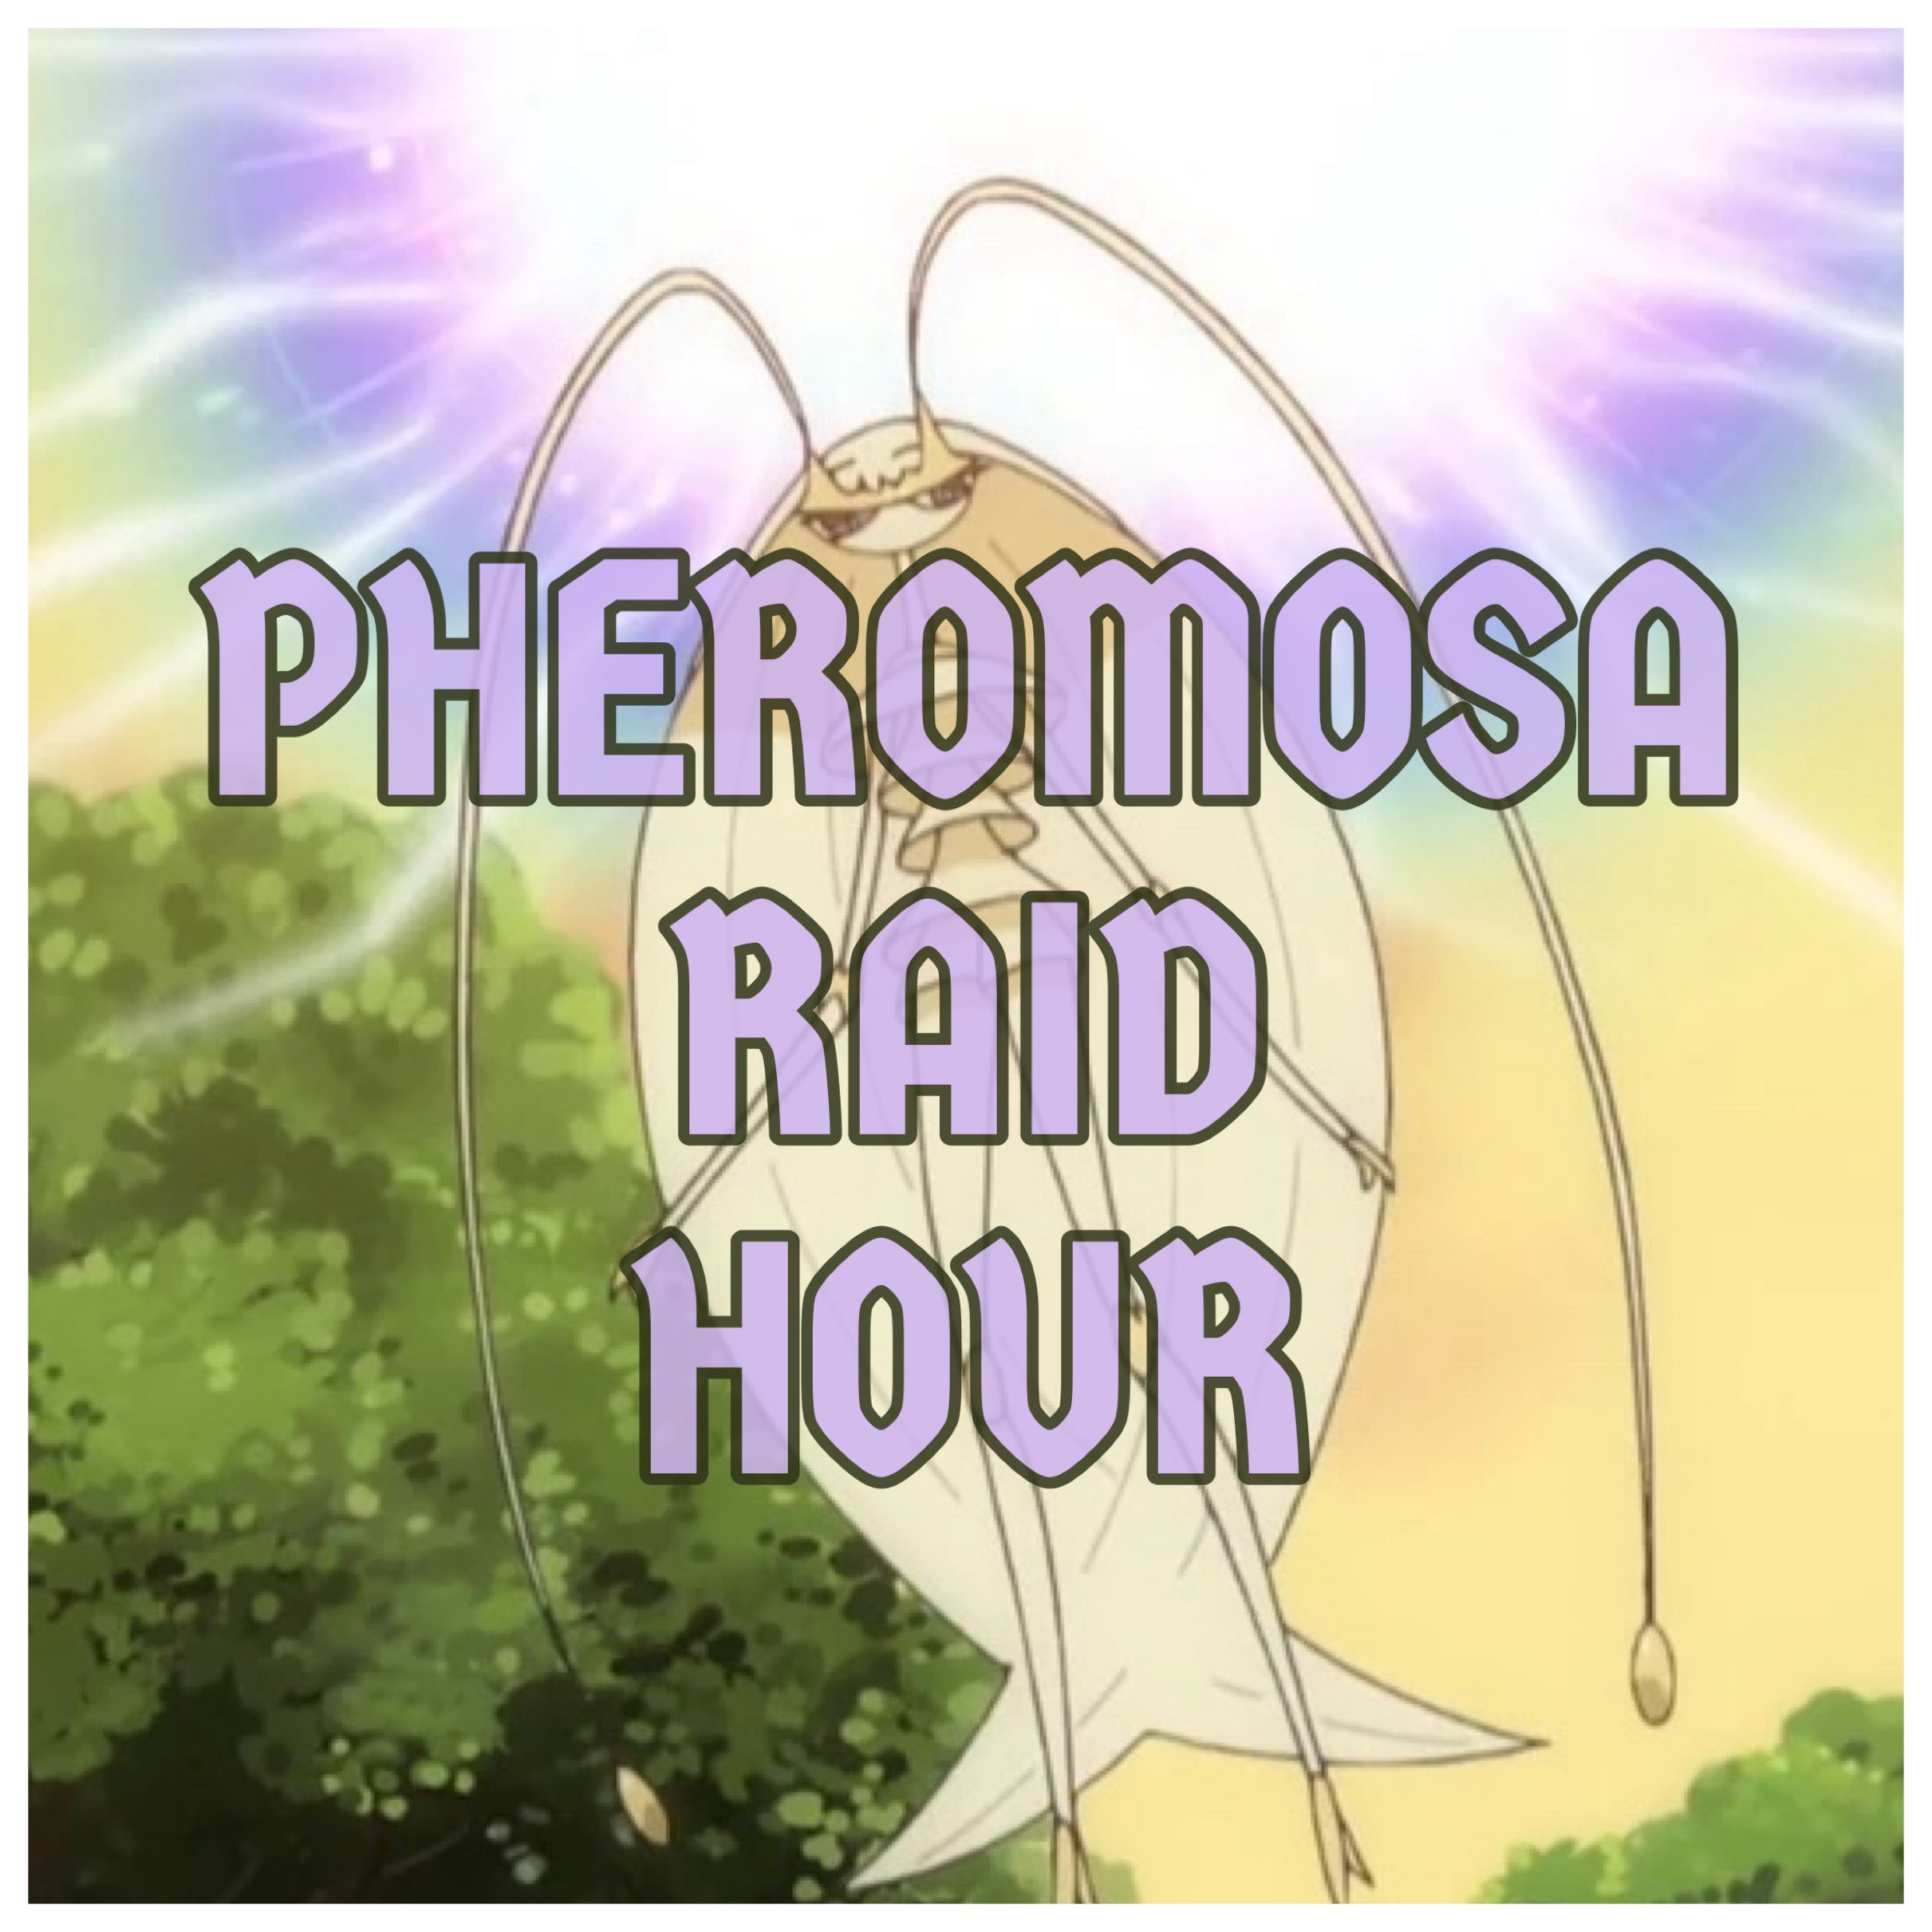 Buzzwole in the background, text on the foreground saying PHEROMOSA RAID HOUR